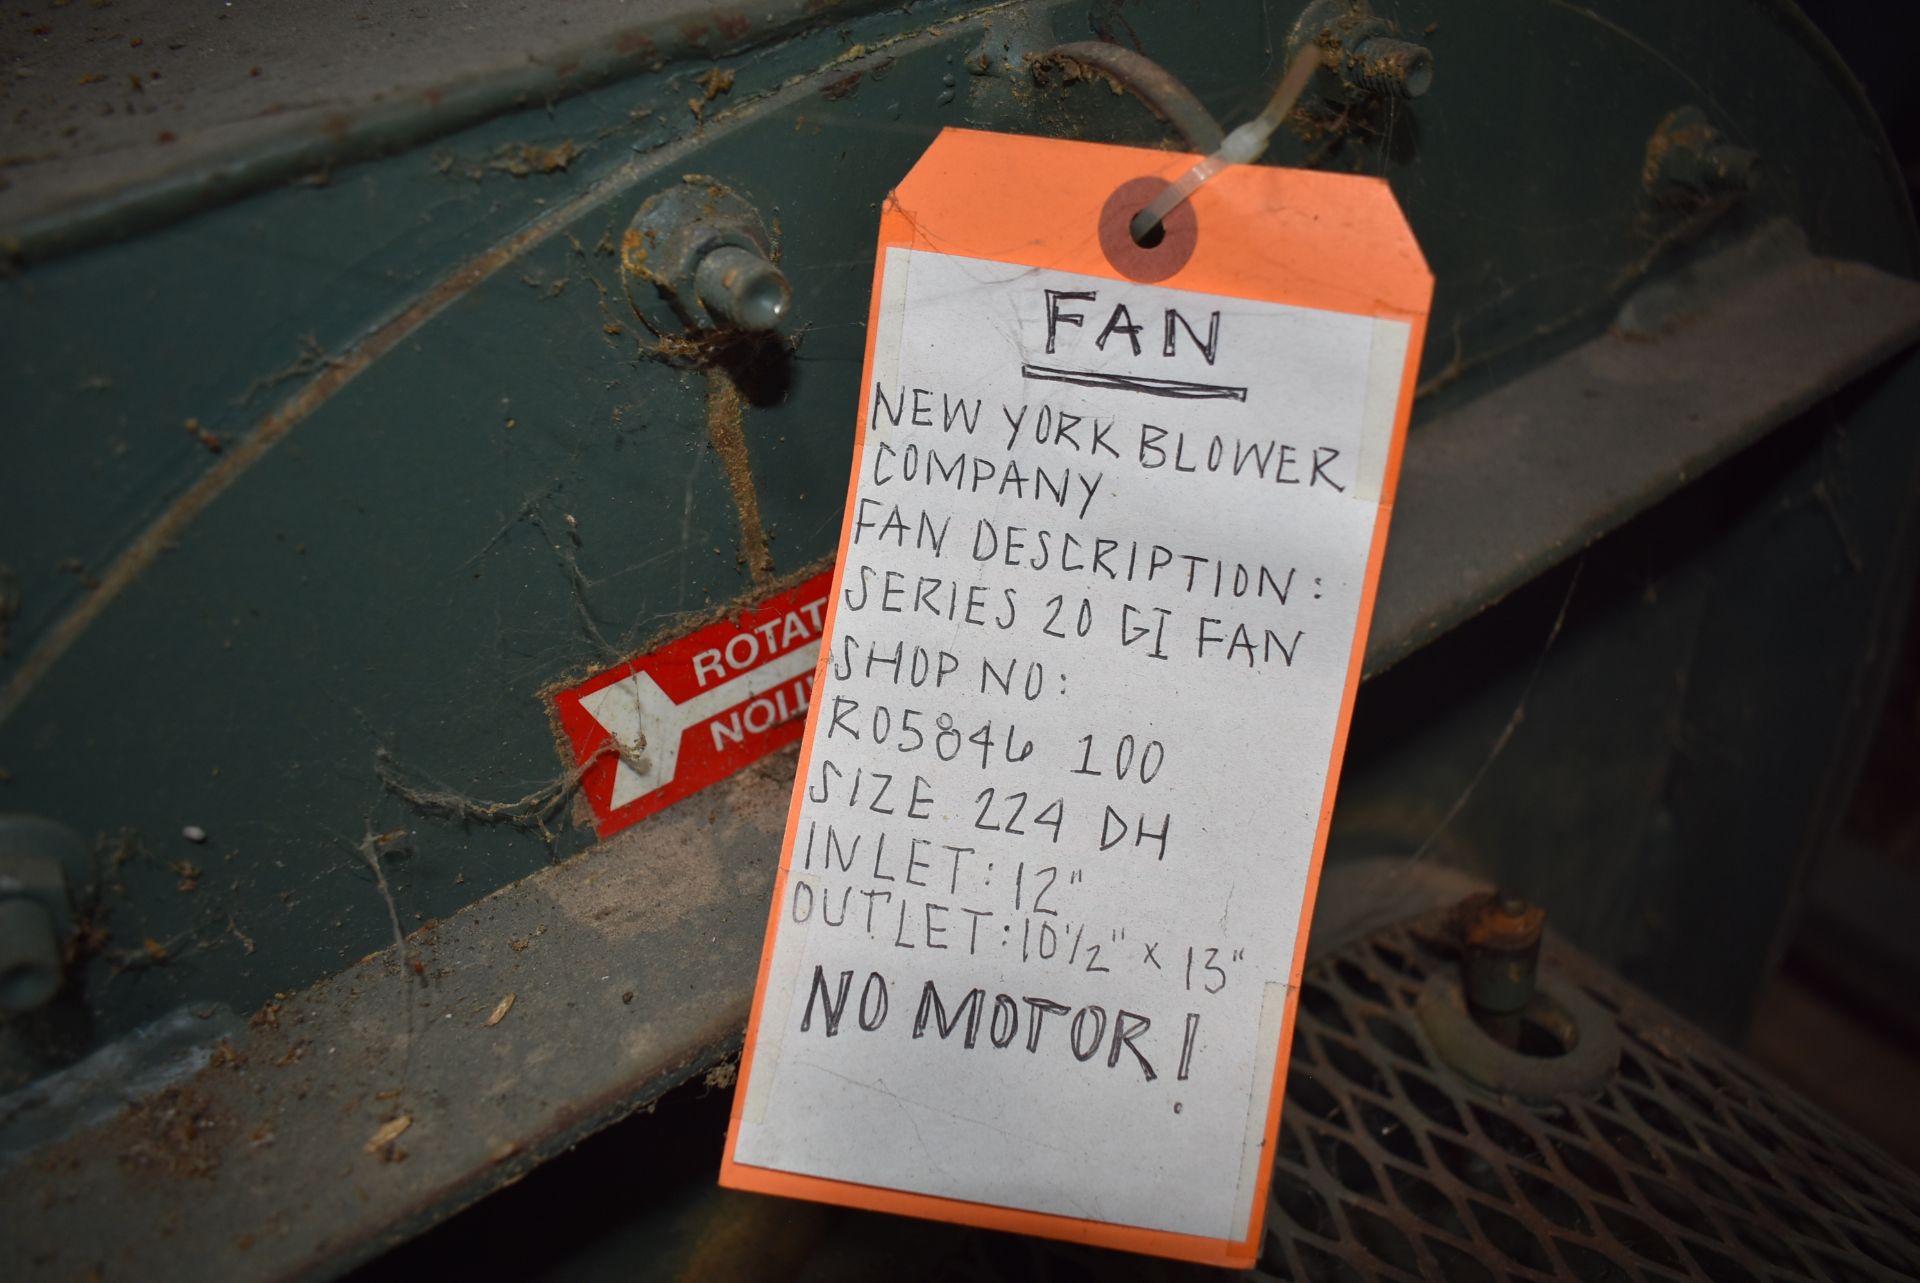 New York Blower, Series 20GI Fan, Size 224-DH, Does Not Include Motor. RIGGING/LOADING FEE $30 - Image 3 of 4